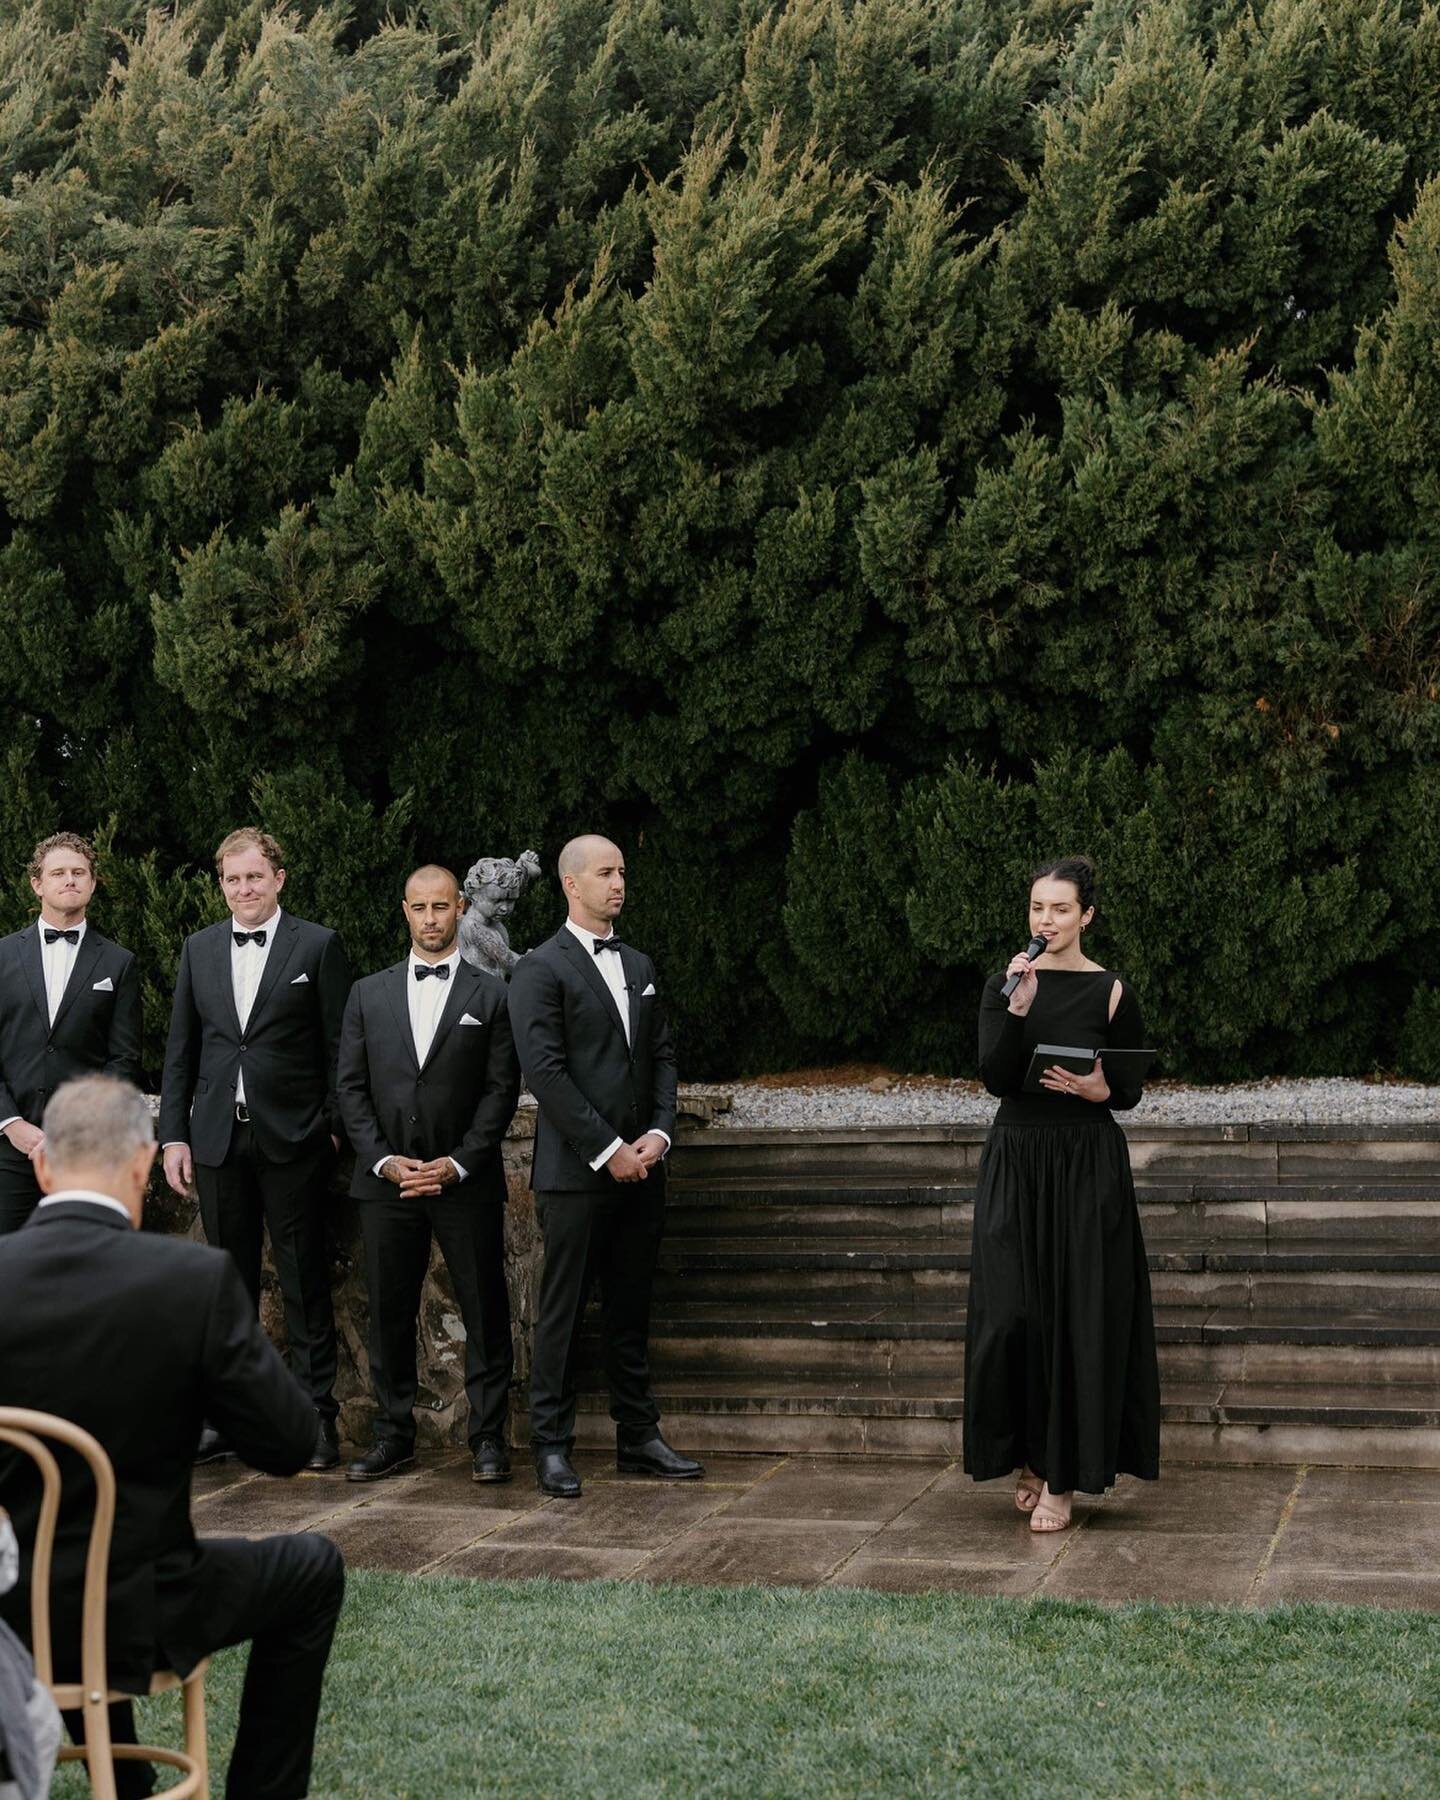 How to transform from celebrant to guest (a photo series):

1. Get everyone to sit down and turn off their phones
2. Tell the love story with a few funny bits and some lovey bits
3. Congratulate the married couple
4. Pose for a photo
5. Listen to spe